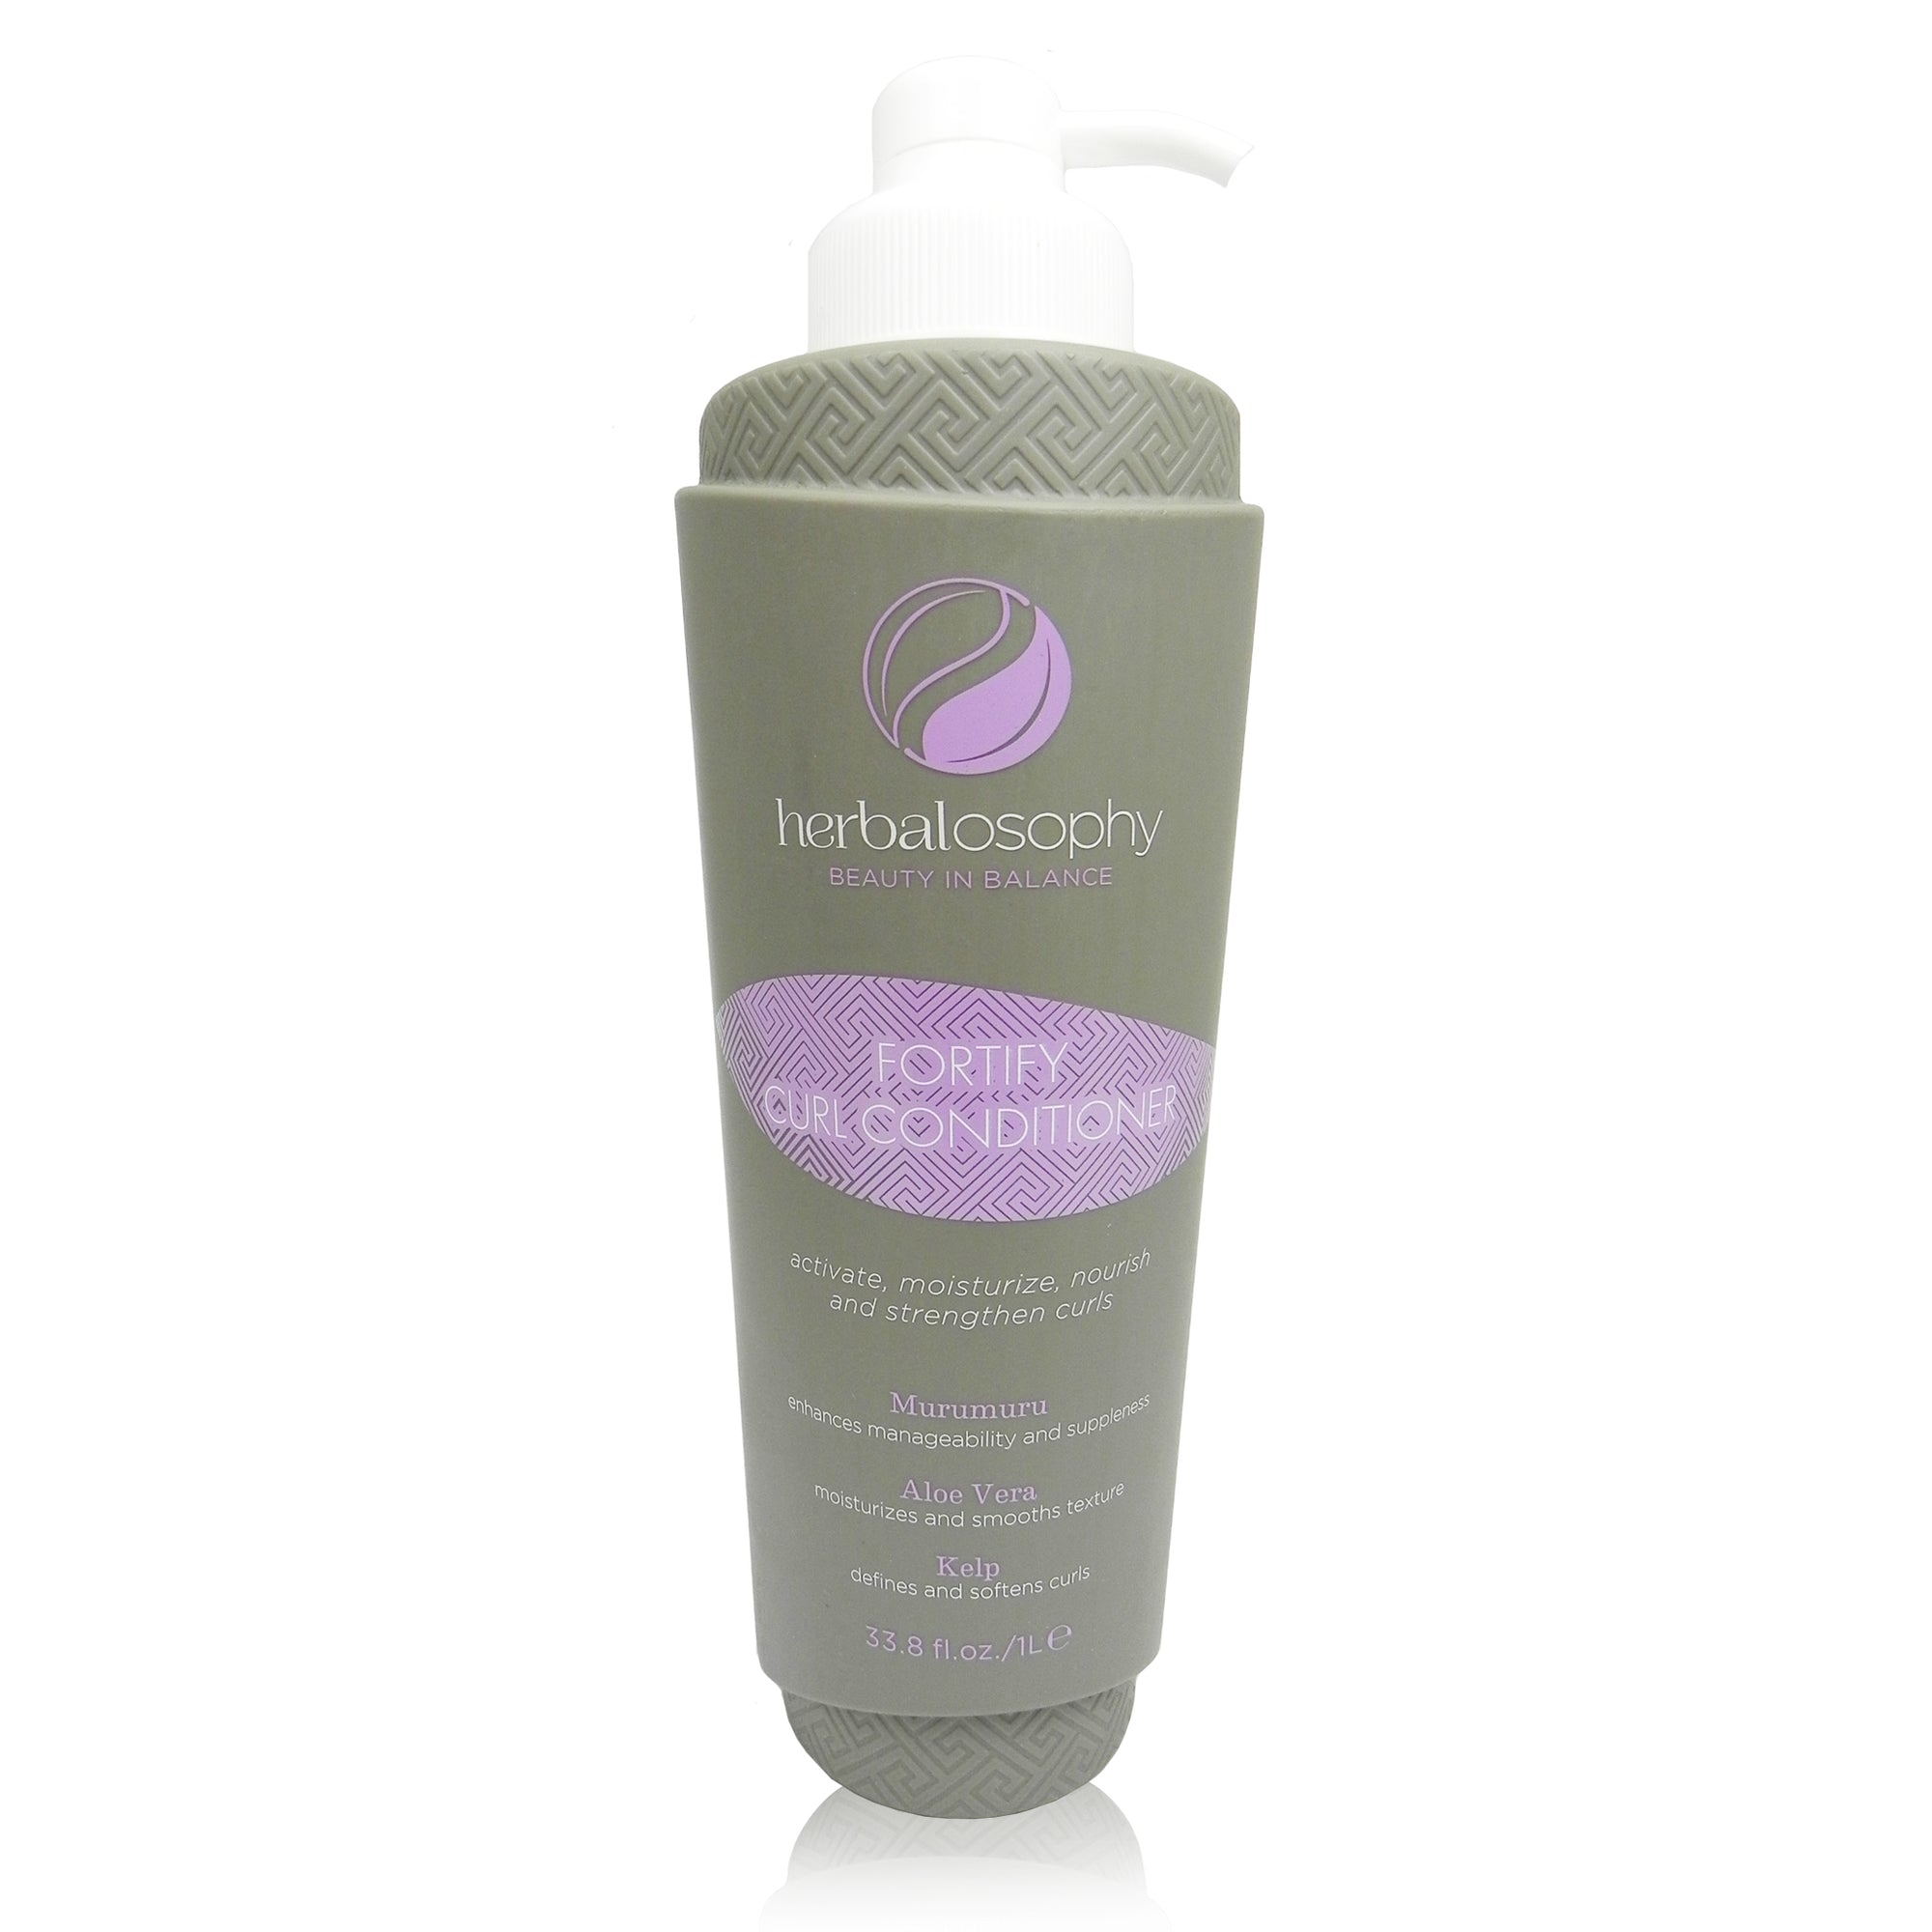 Herbalosophy Fortify Curl Conditioner bottle 33.8oz